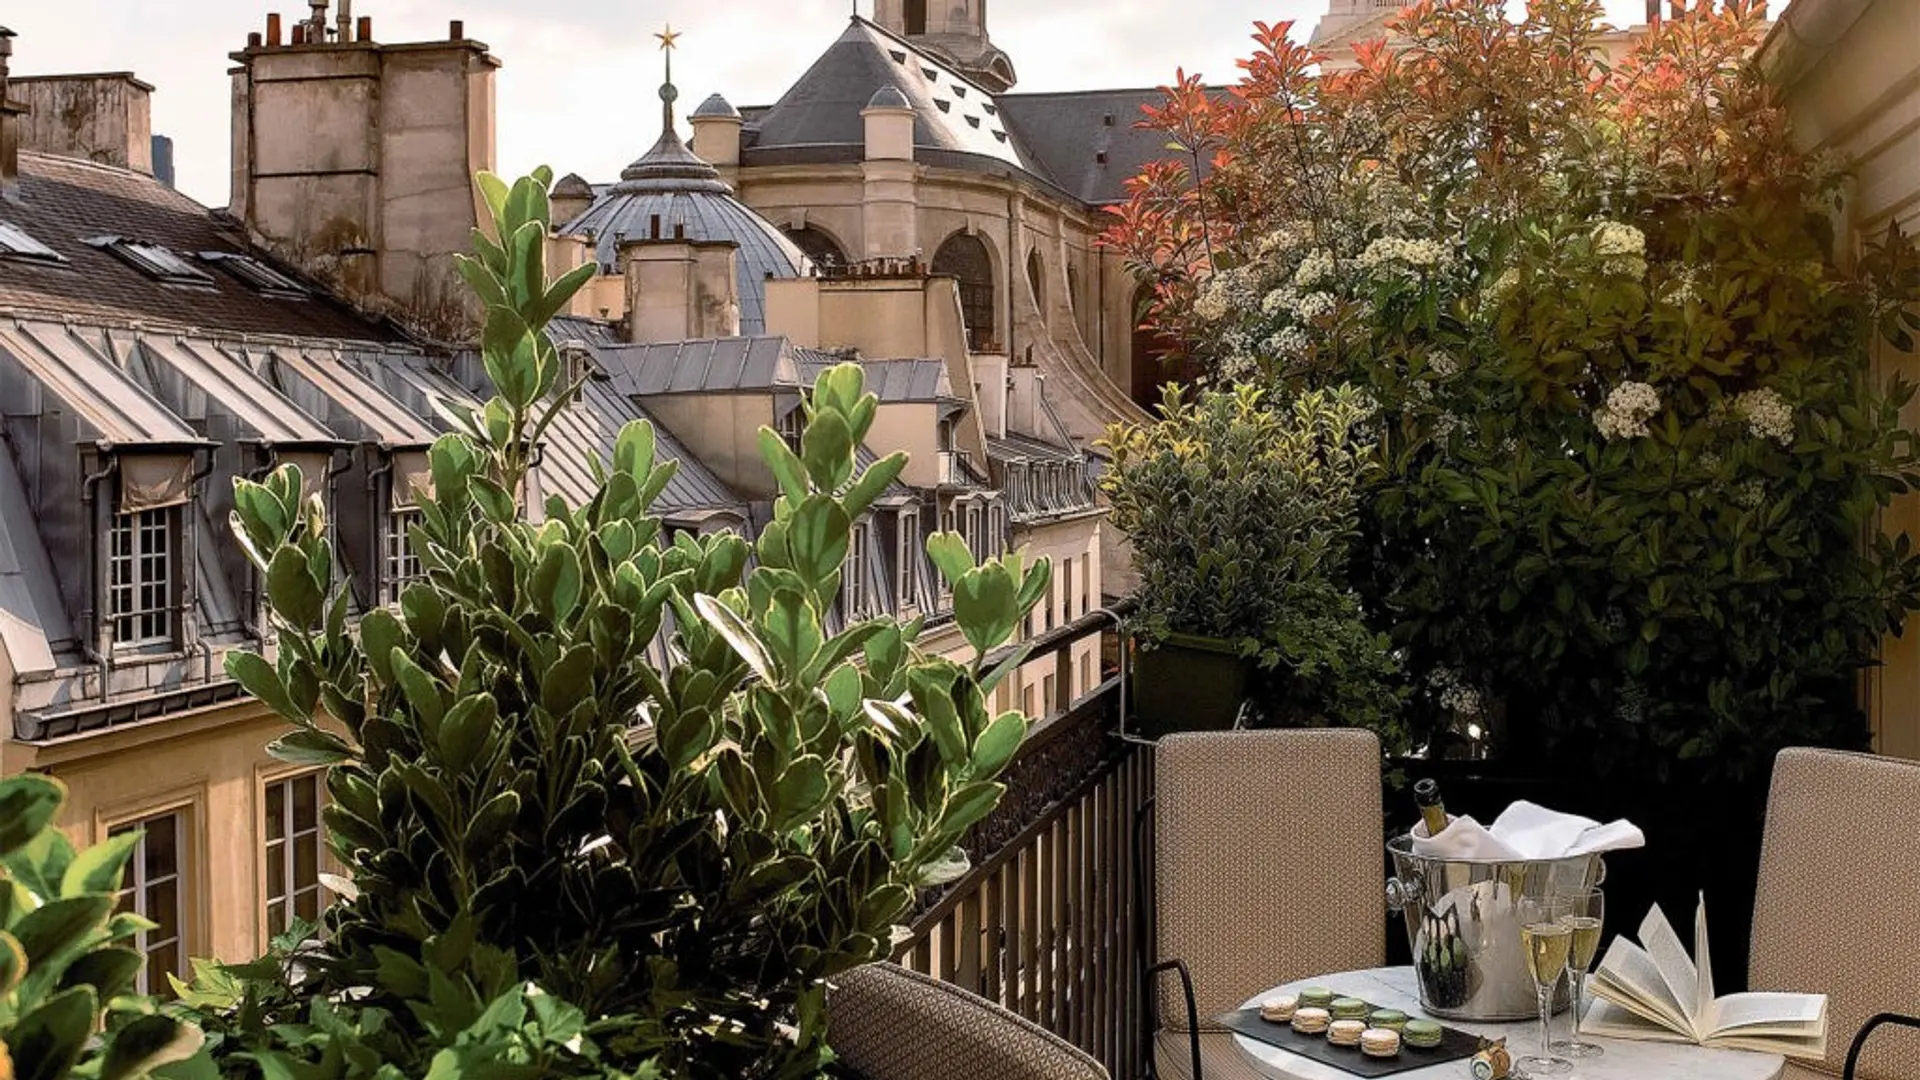 terrace at esprit saint germain hotel with champagne glasses